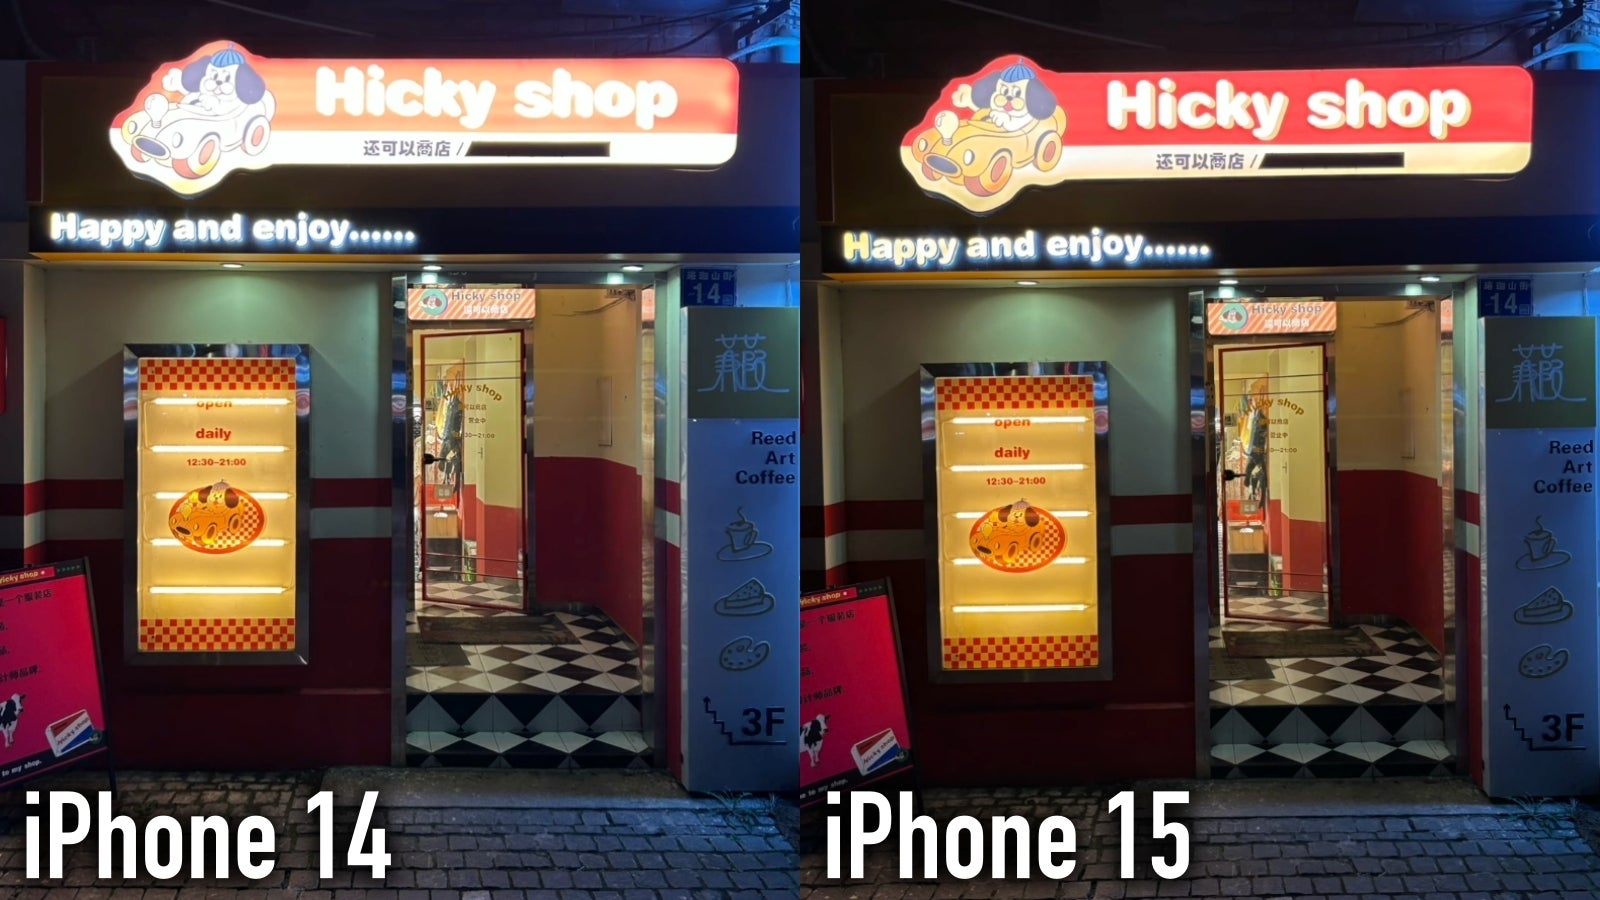 After years of subpar HDR performance in photos, iPhone 15 brings massive improvements in this crucial area of&amp;nbsp; smartphone photography. - $800 iPhone 15 seems too good to be real: Apple can be super generous when the bar is set low